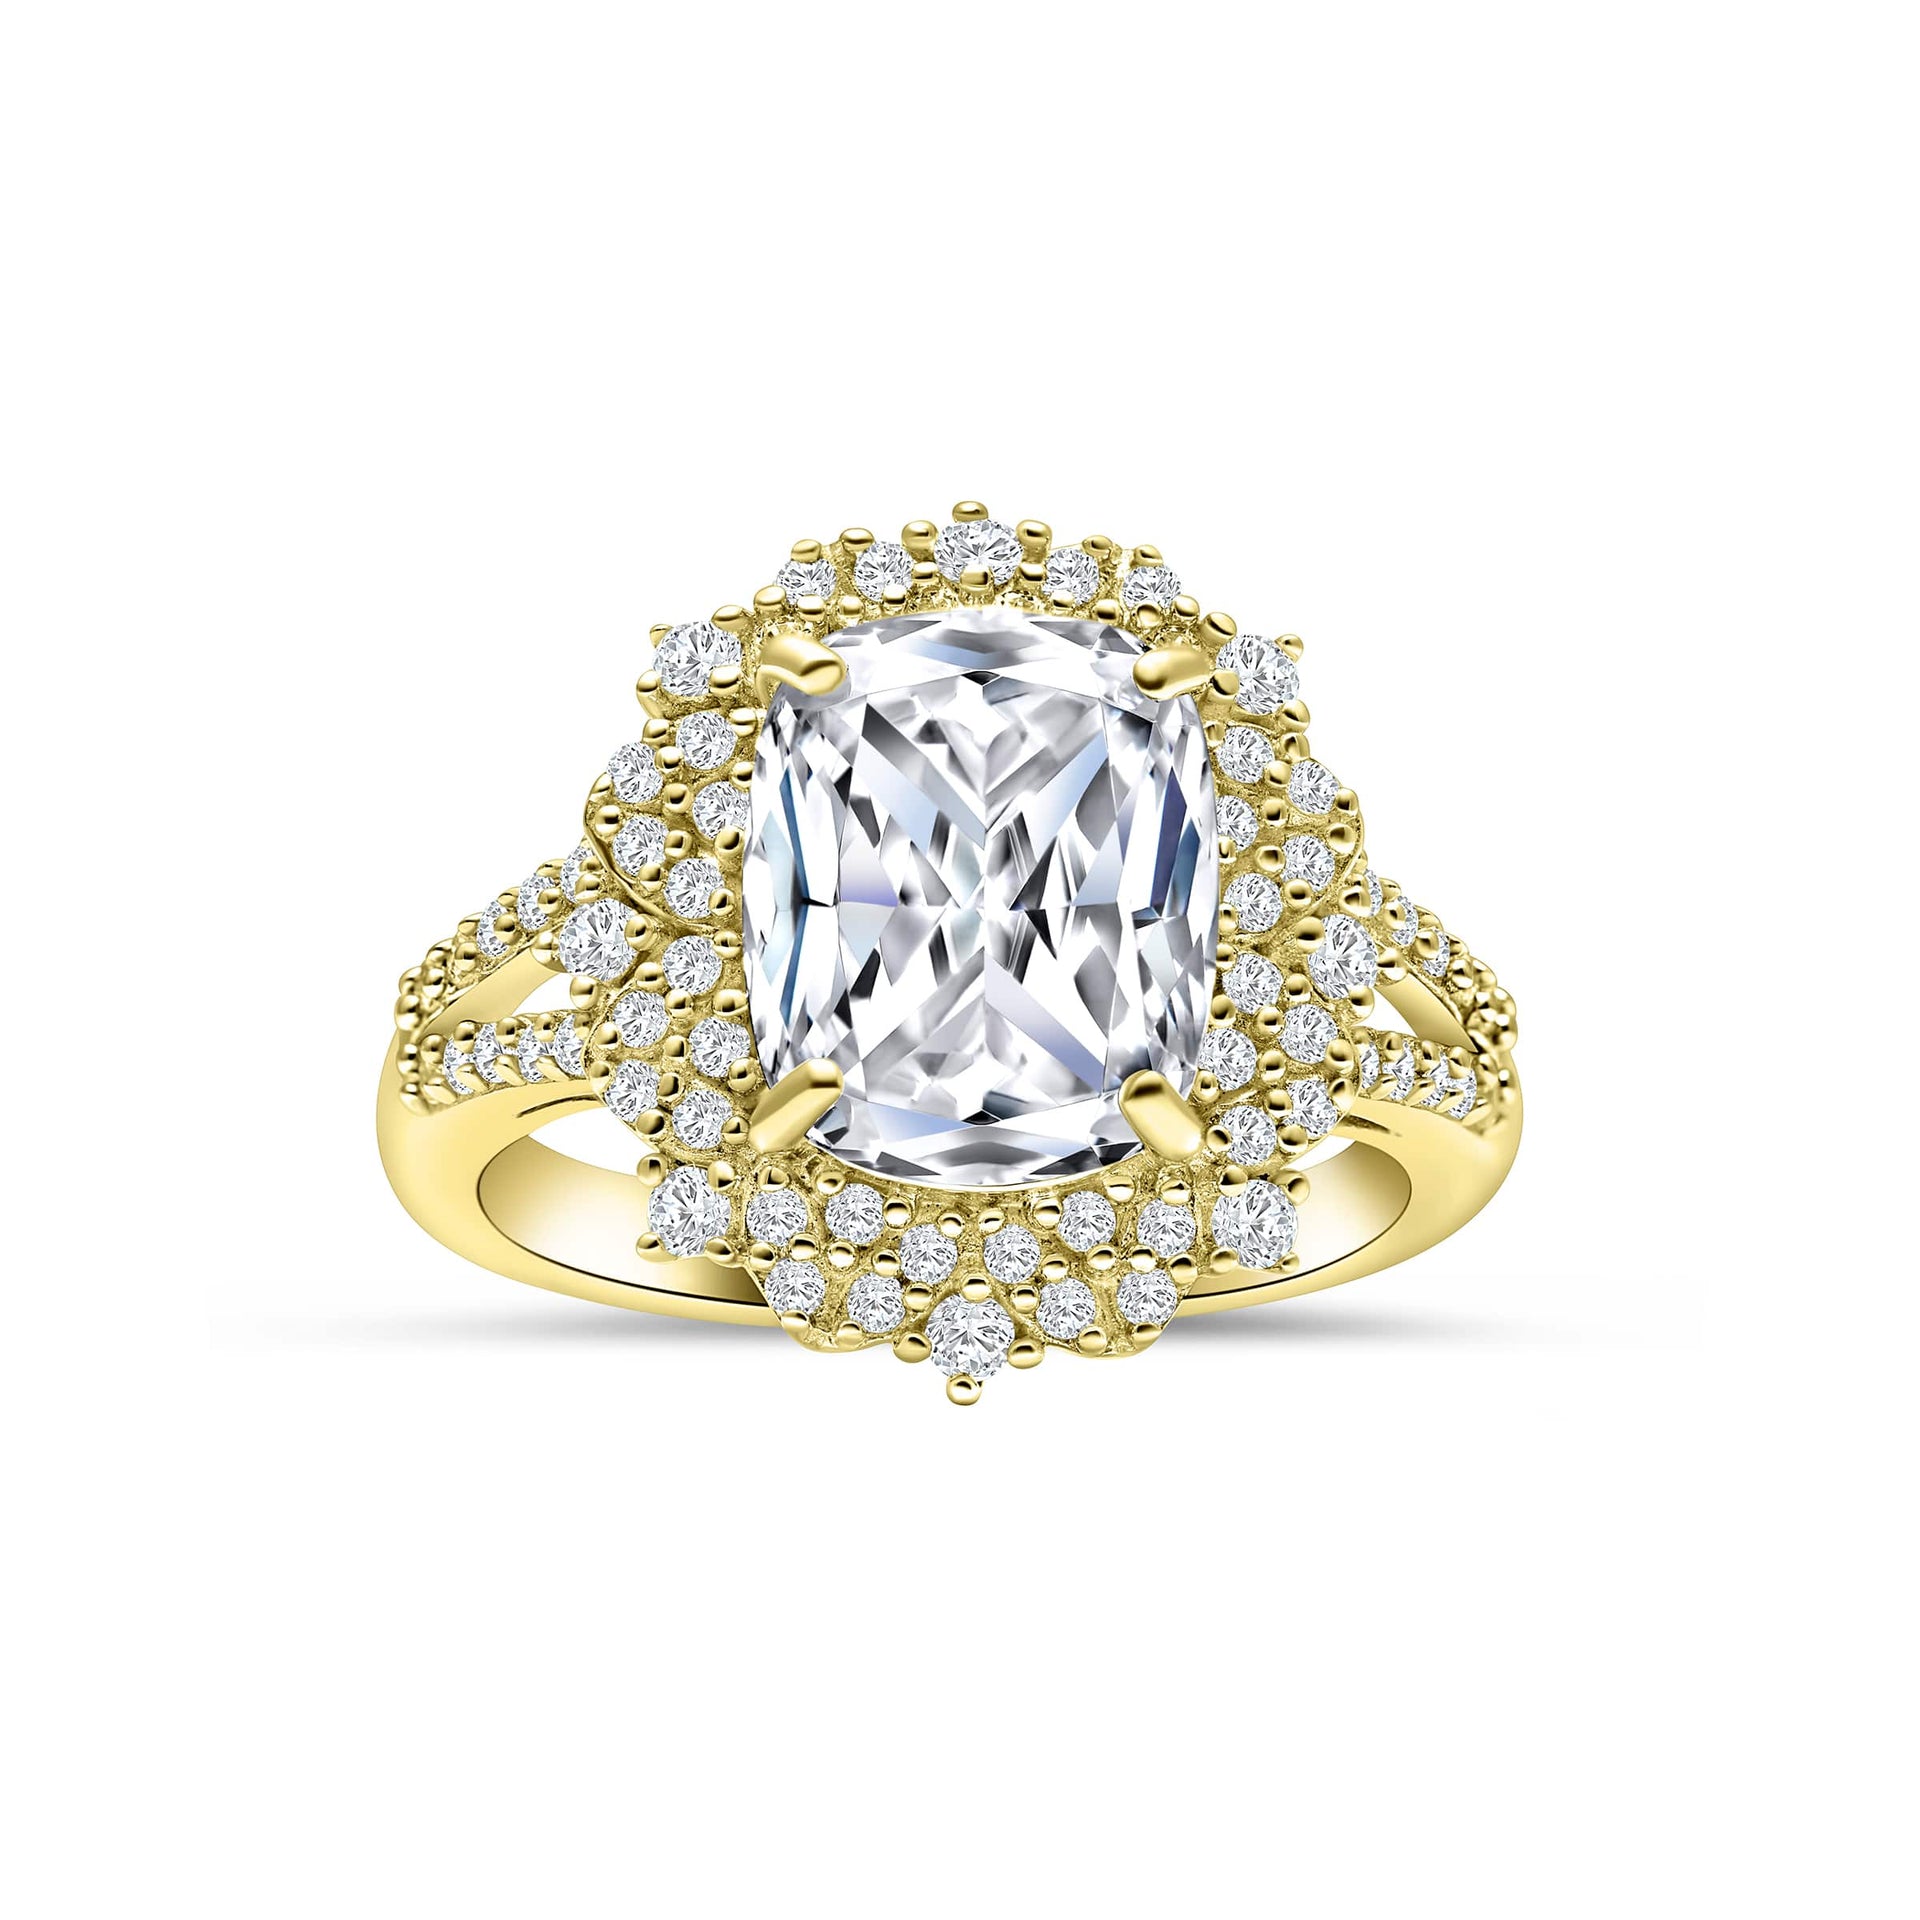 standing photo of beautiful 2.5 ct cushion cut engagement ring in gold